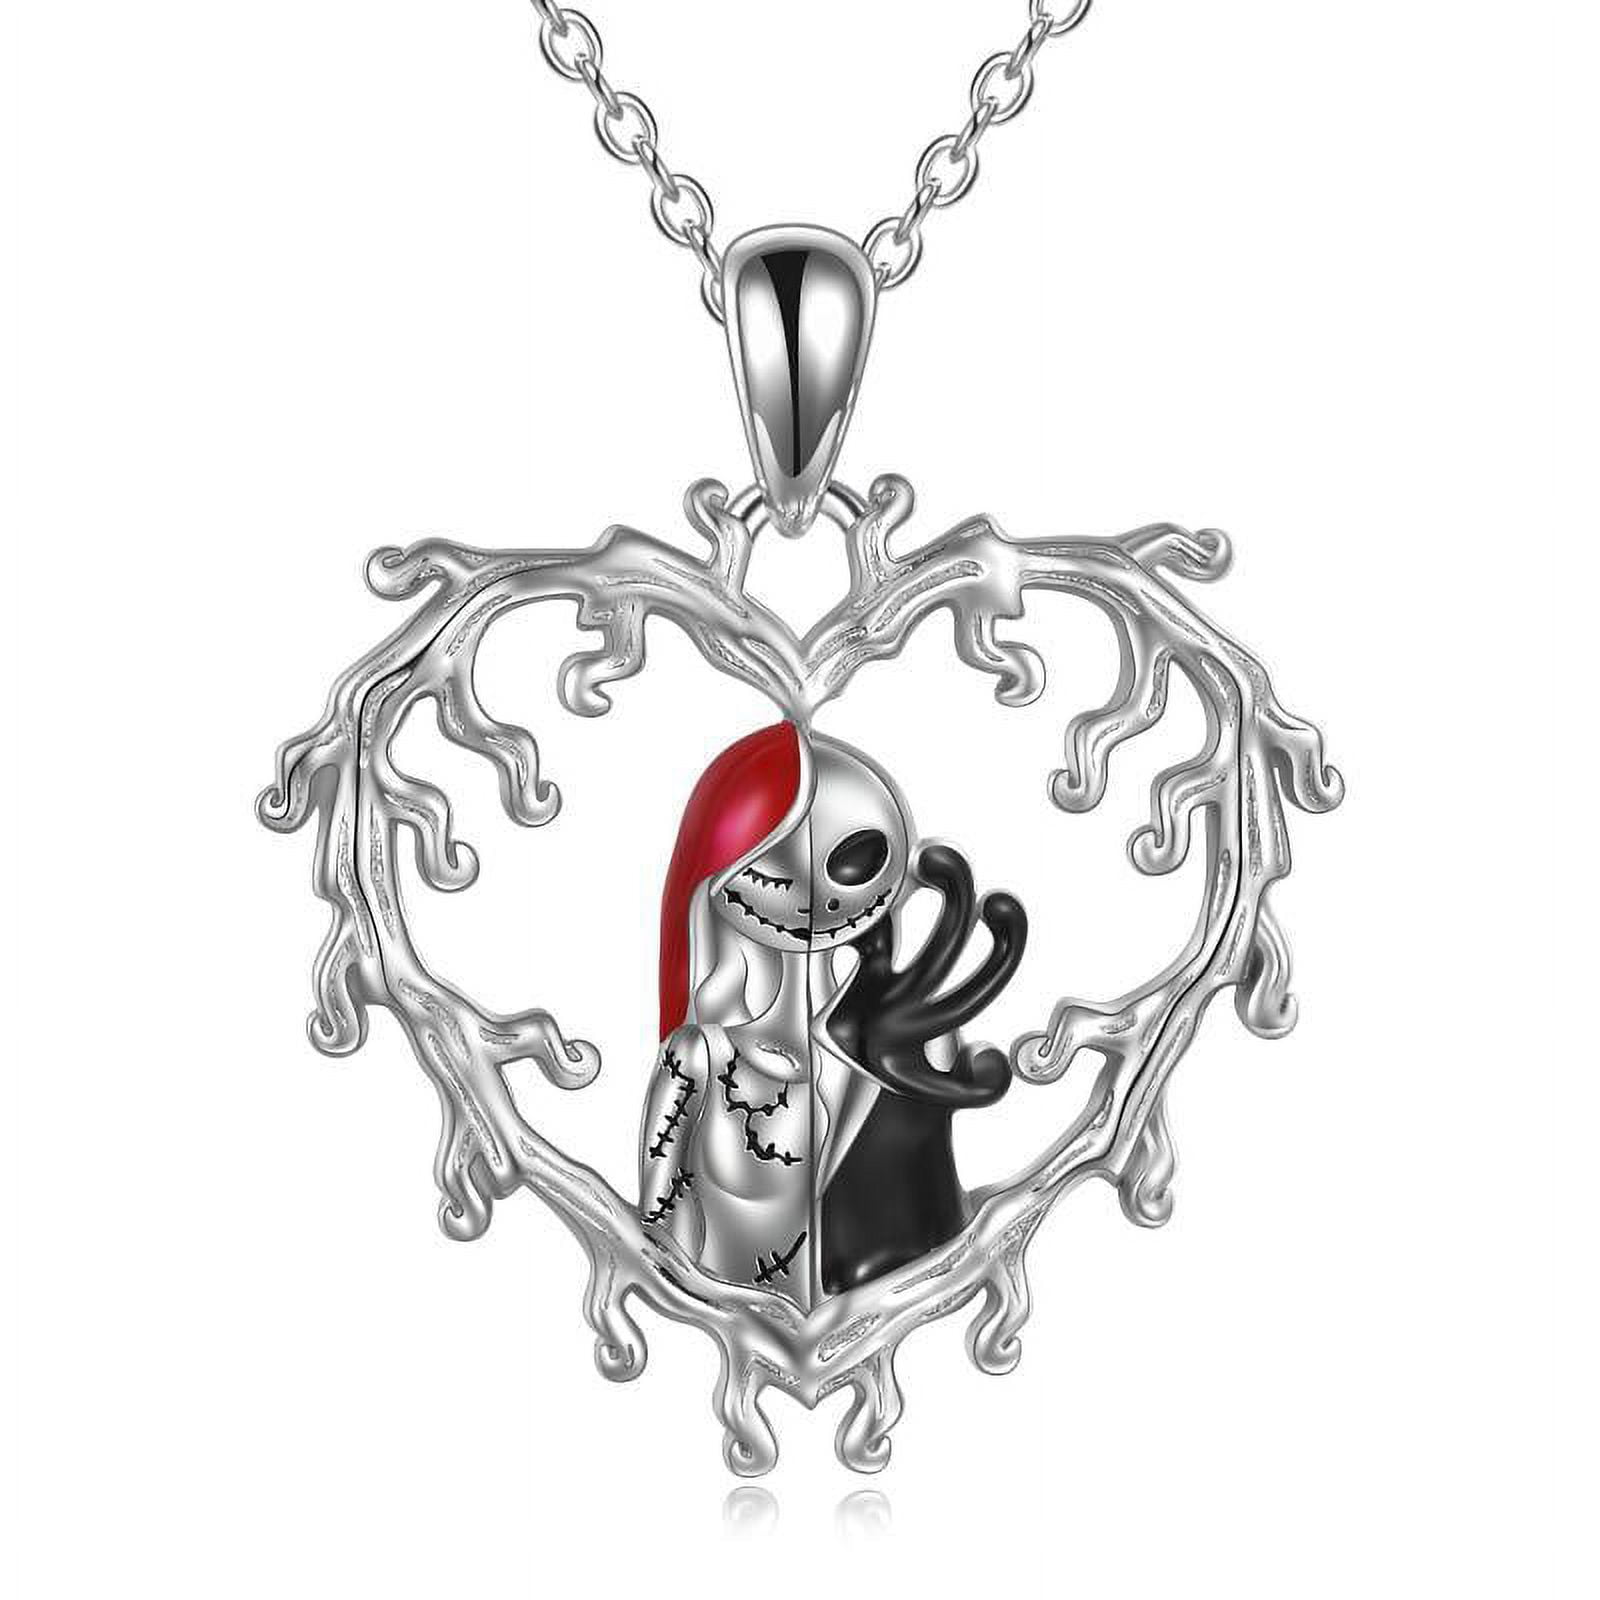 Nightmare Before Christmas Jack Skellington and Sally Sterling Silver Heart Pendant Necklace 4ea60d4c f0d1 426f 83b8 7cf04143efda.7e617497aa213bd2555c6a3ab7eaab8e